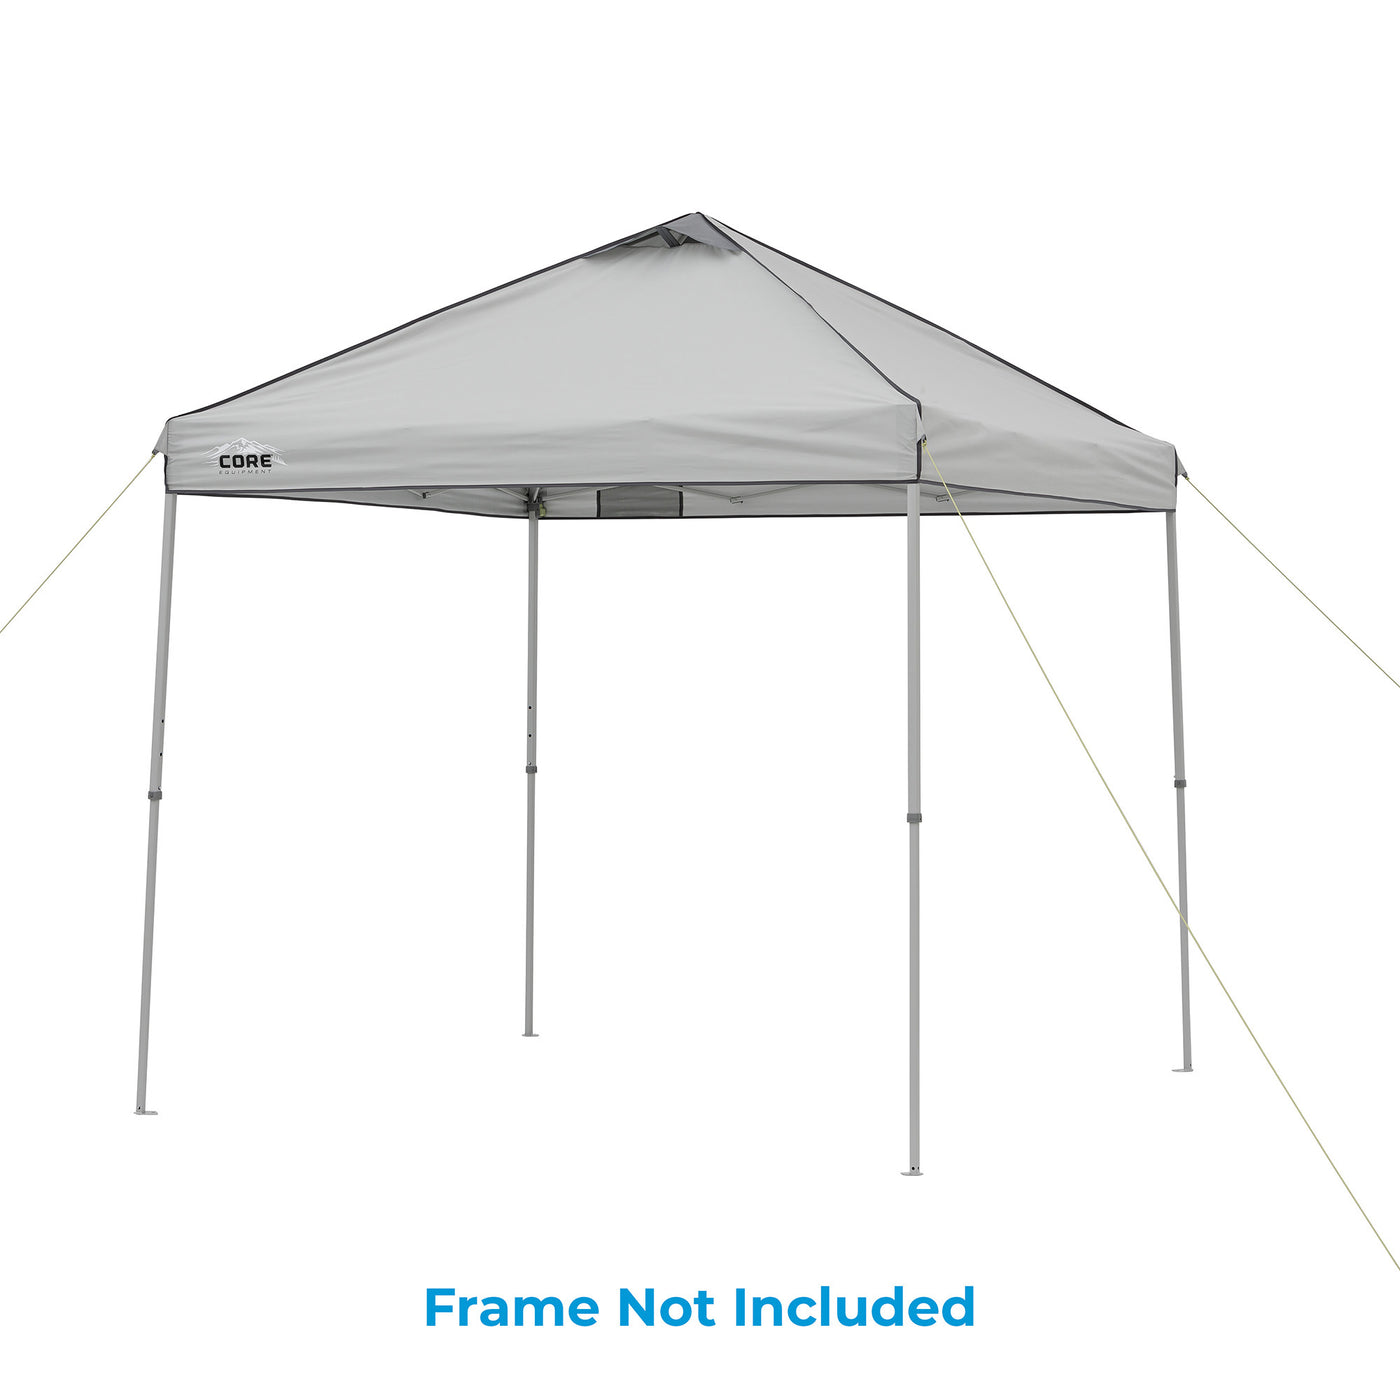 8' x 8' Instant Canopy Top